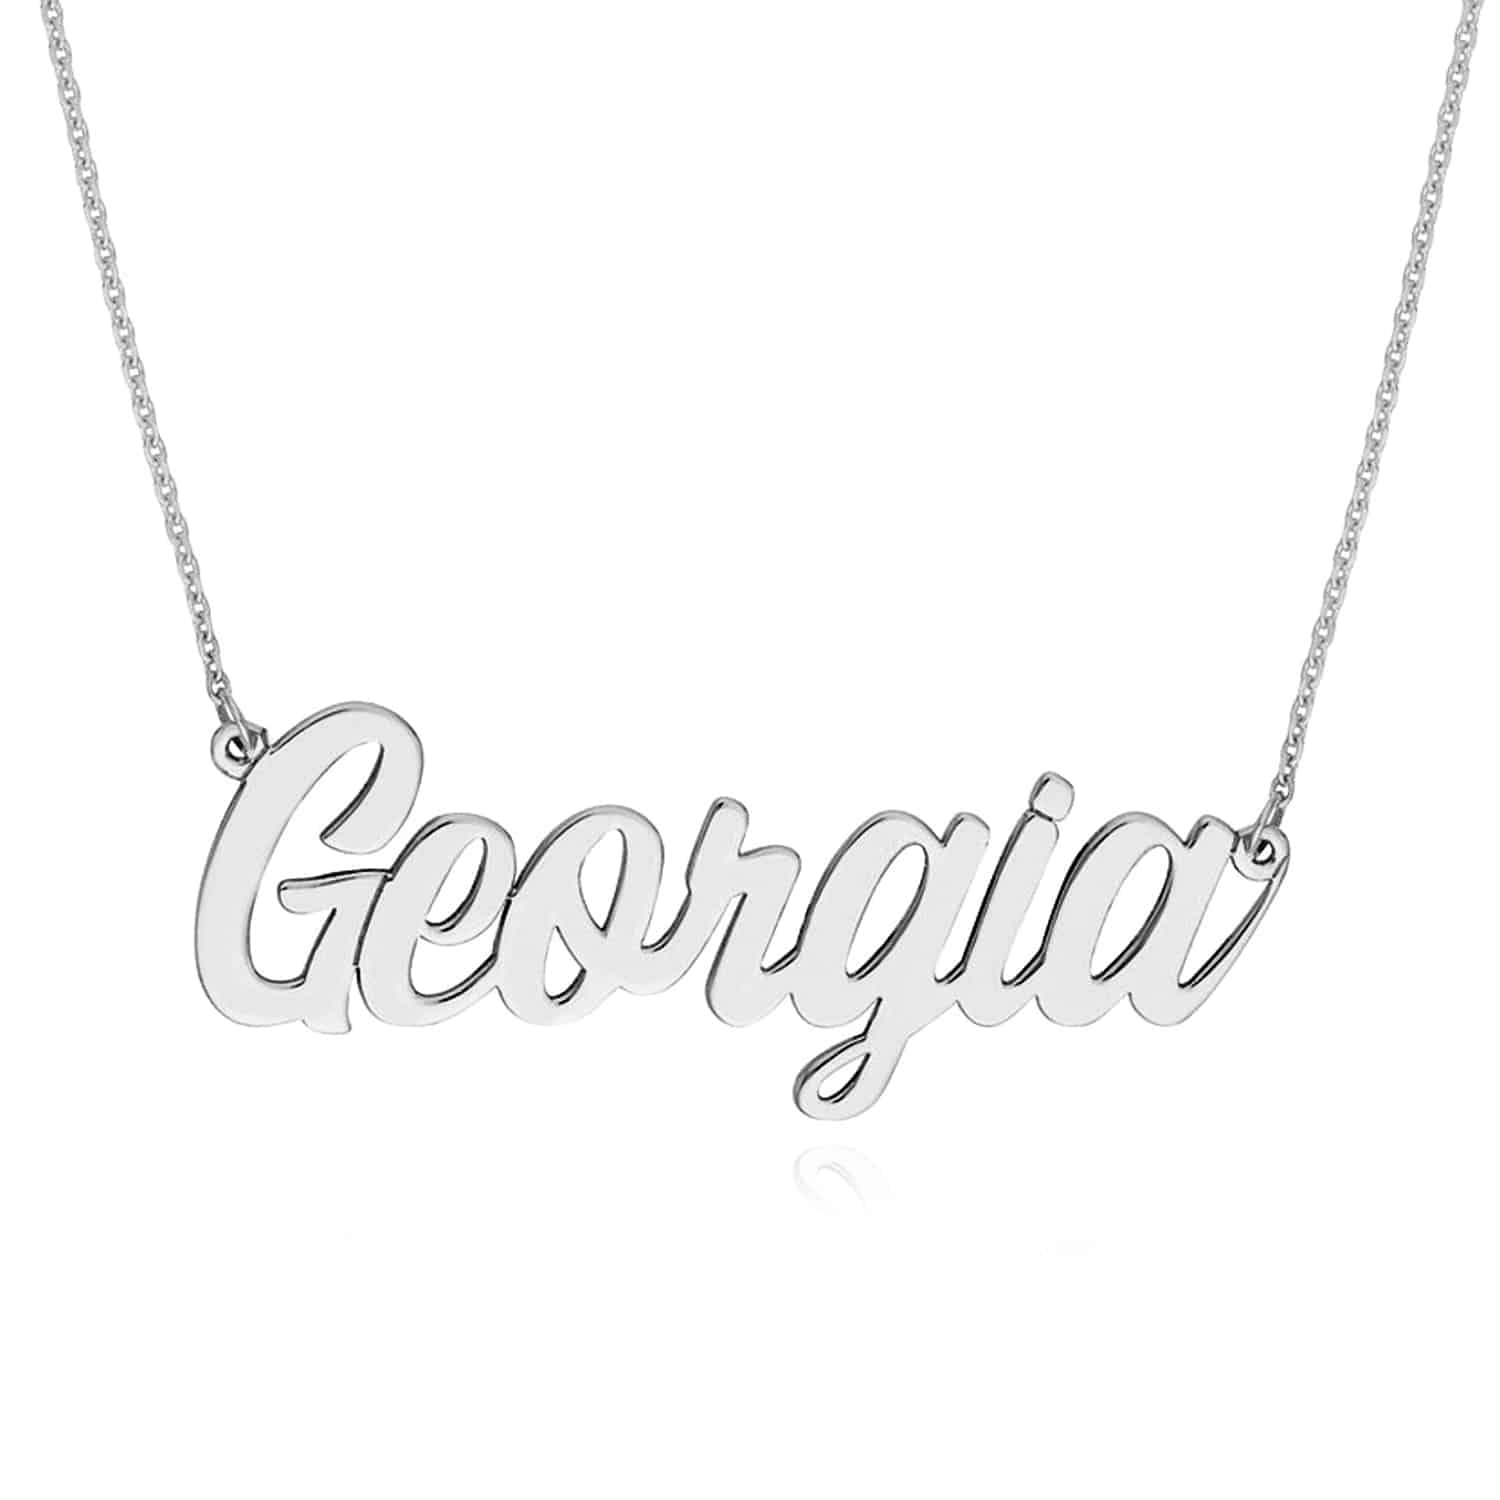 Customizable 14K Gold Yellow White Rose Script Font Nameplate Pendant Necklace - White Gold, 14"-16" Adjustable